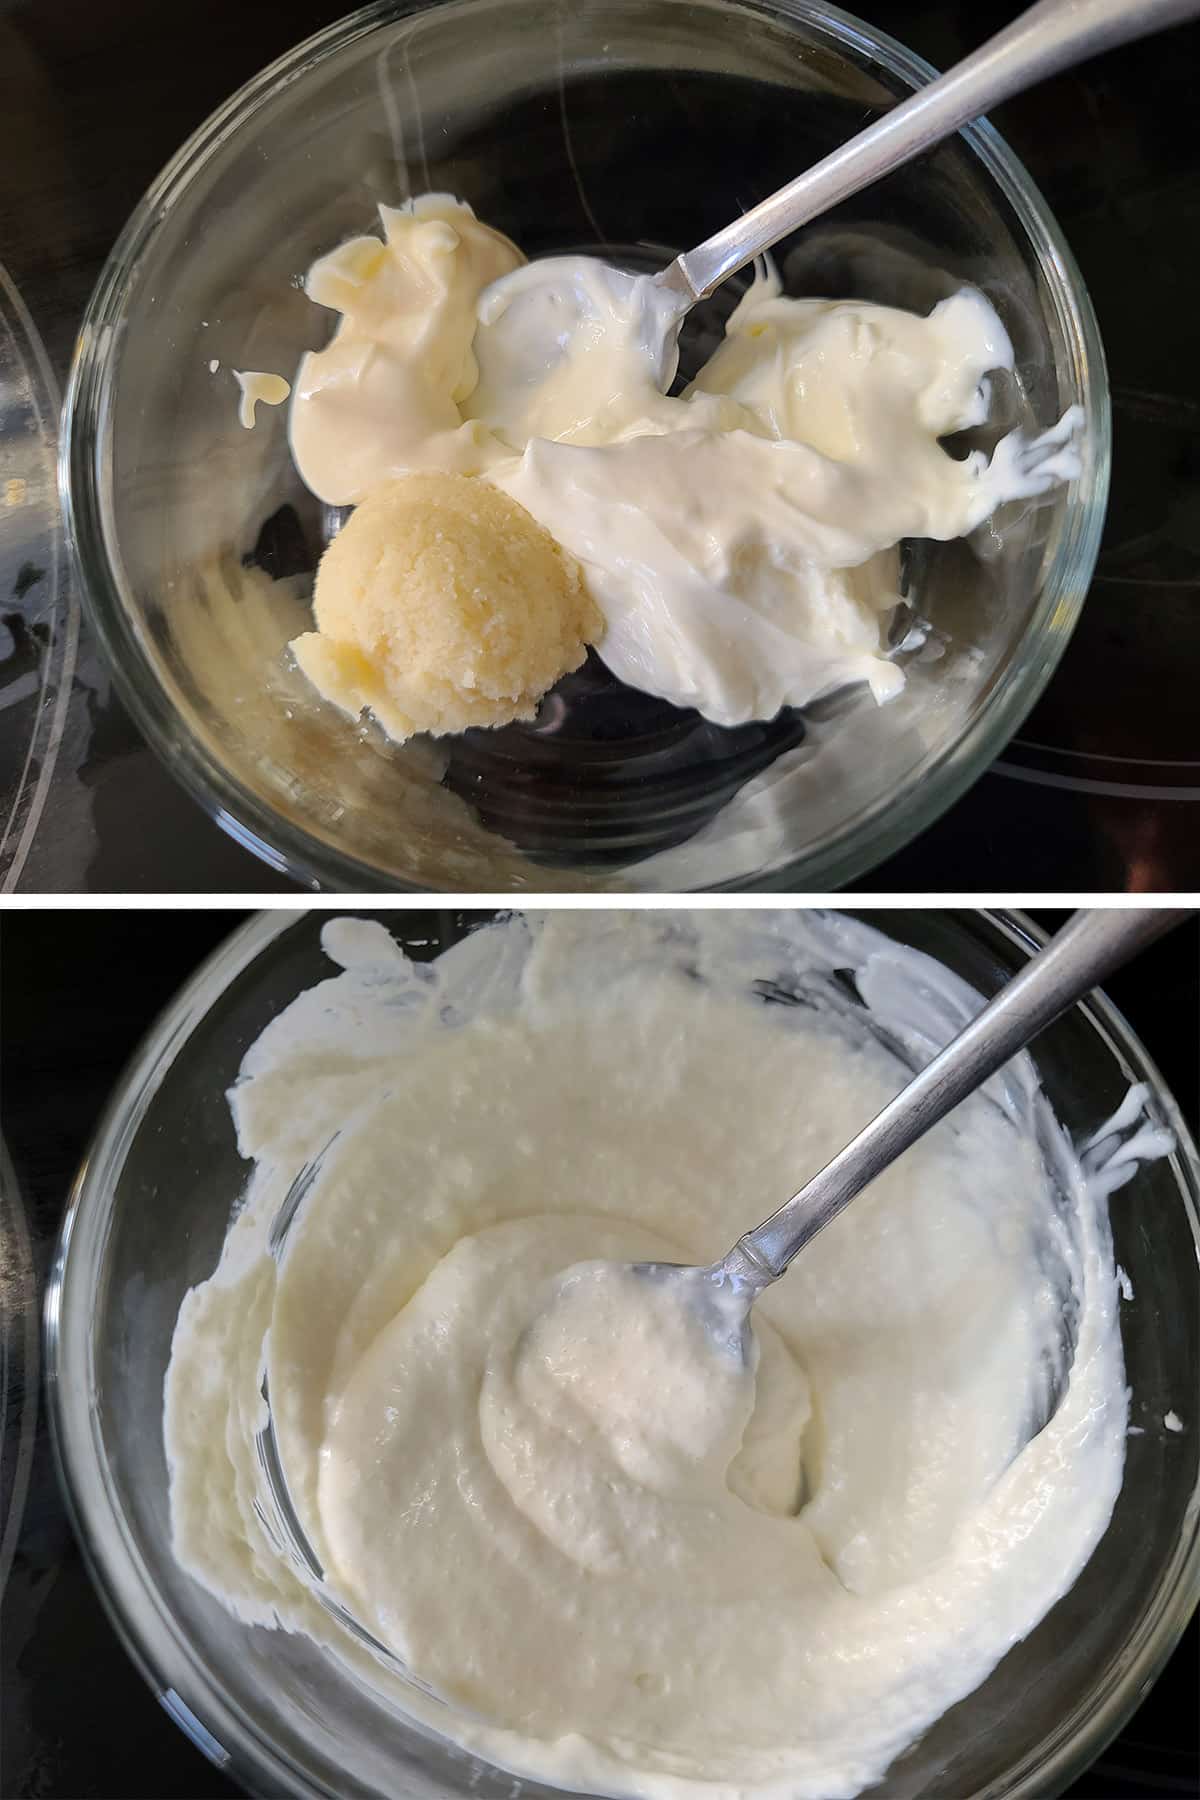 A 2 part image showing the horseradish sauce being mixed in a small bowl.